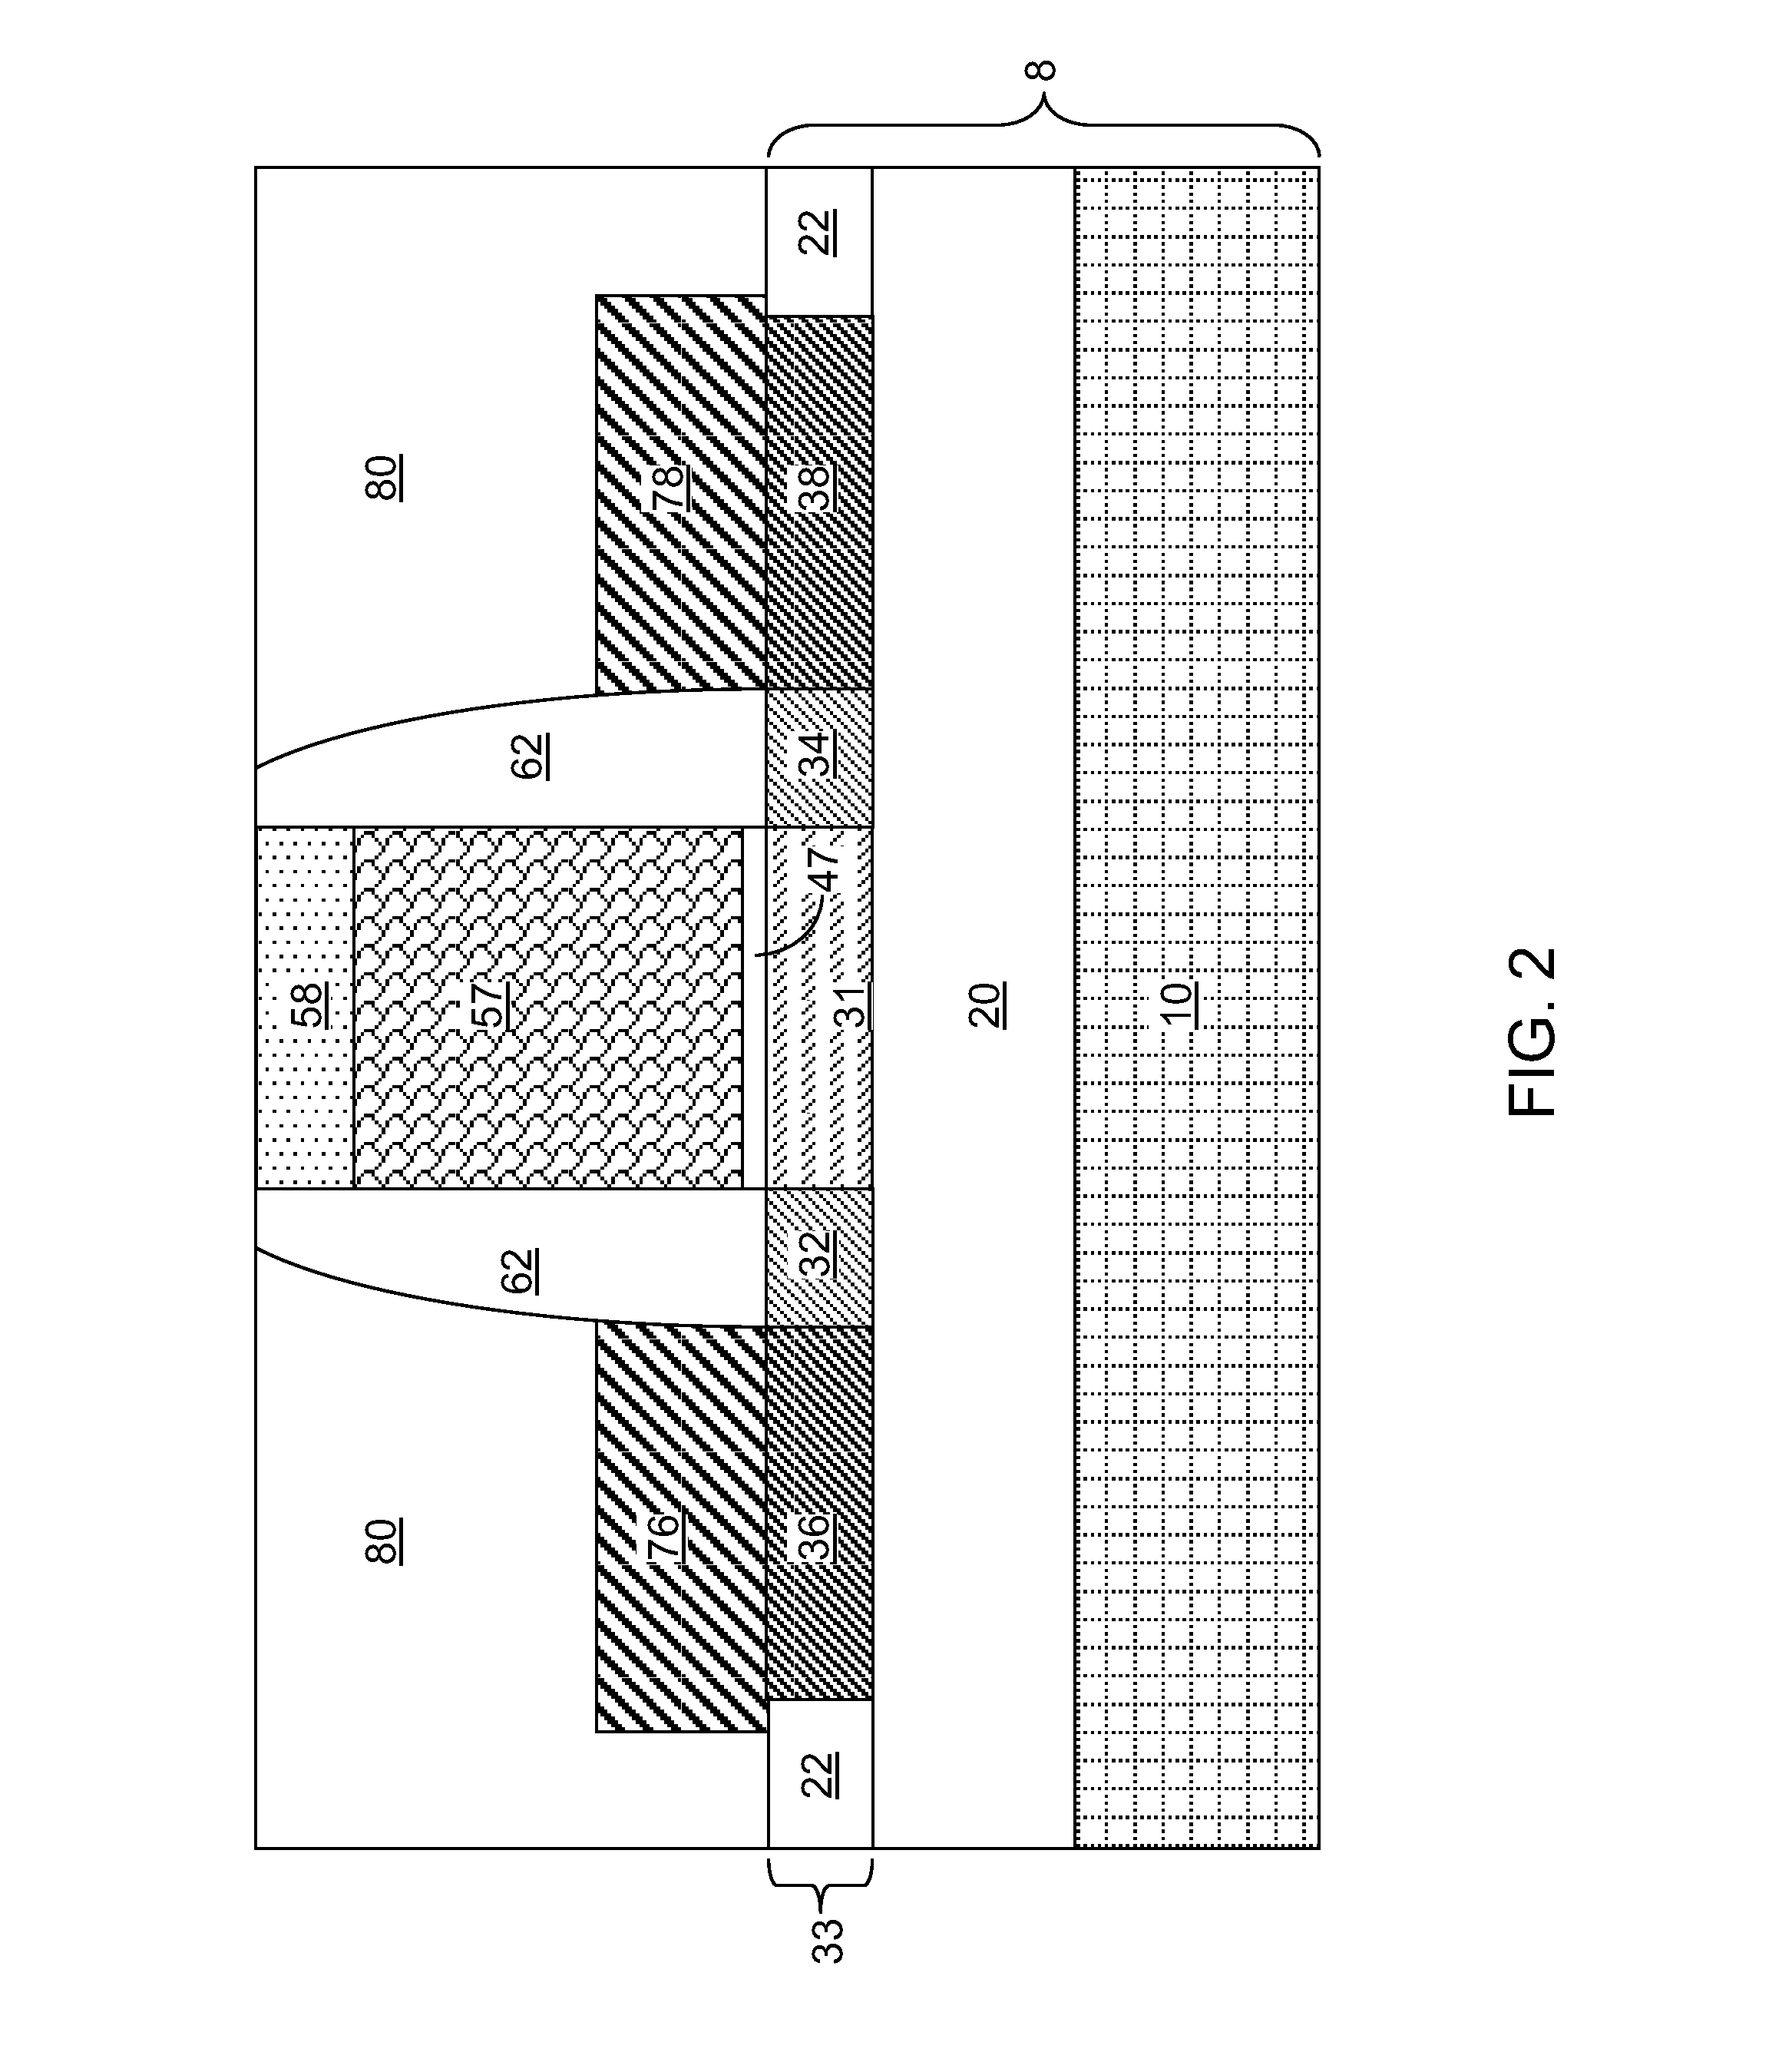 Replacement metal gate with a conductive metal oxynitride layer